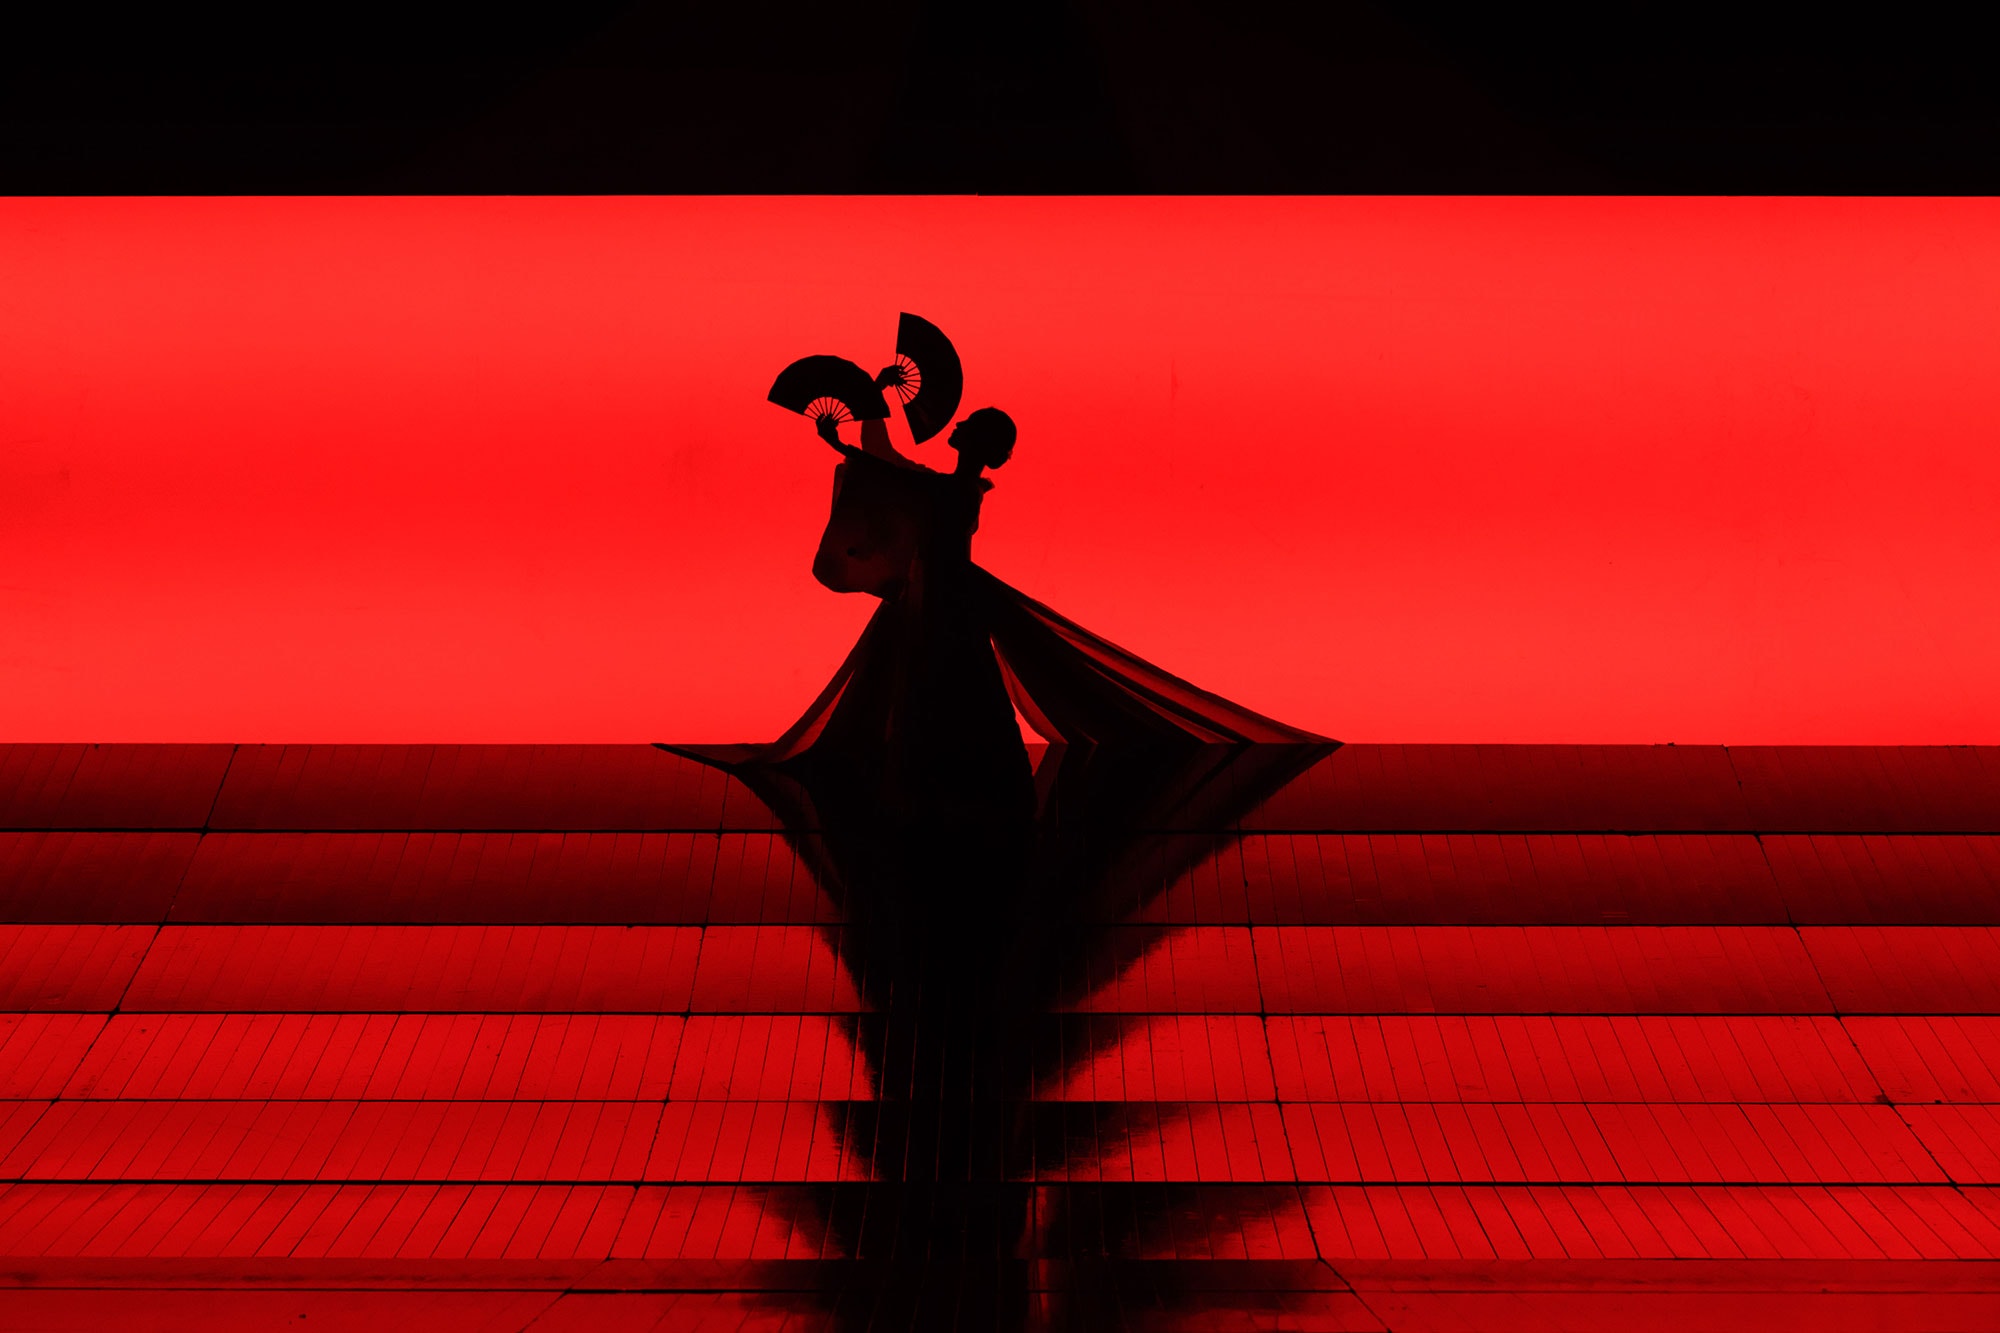 Fan dancer stands silhouetted against a red background at the top of the stage